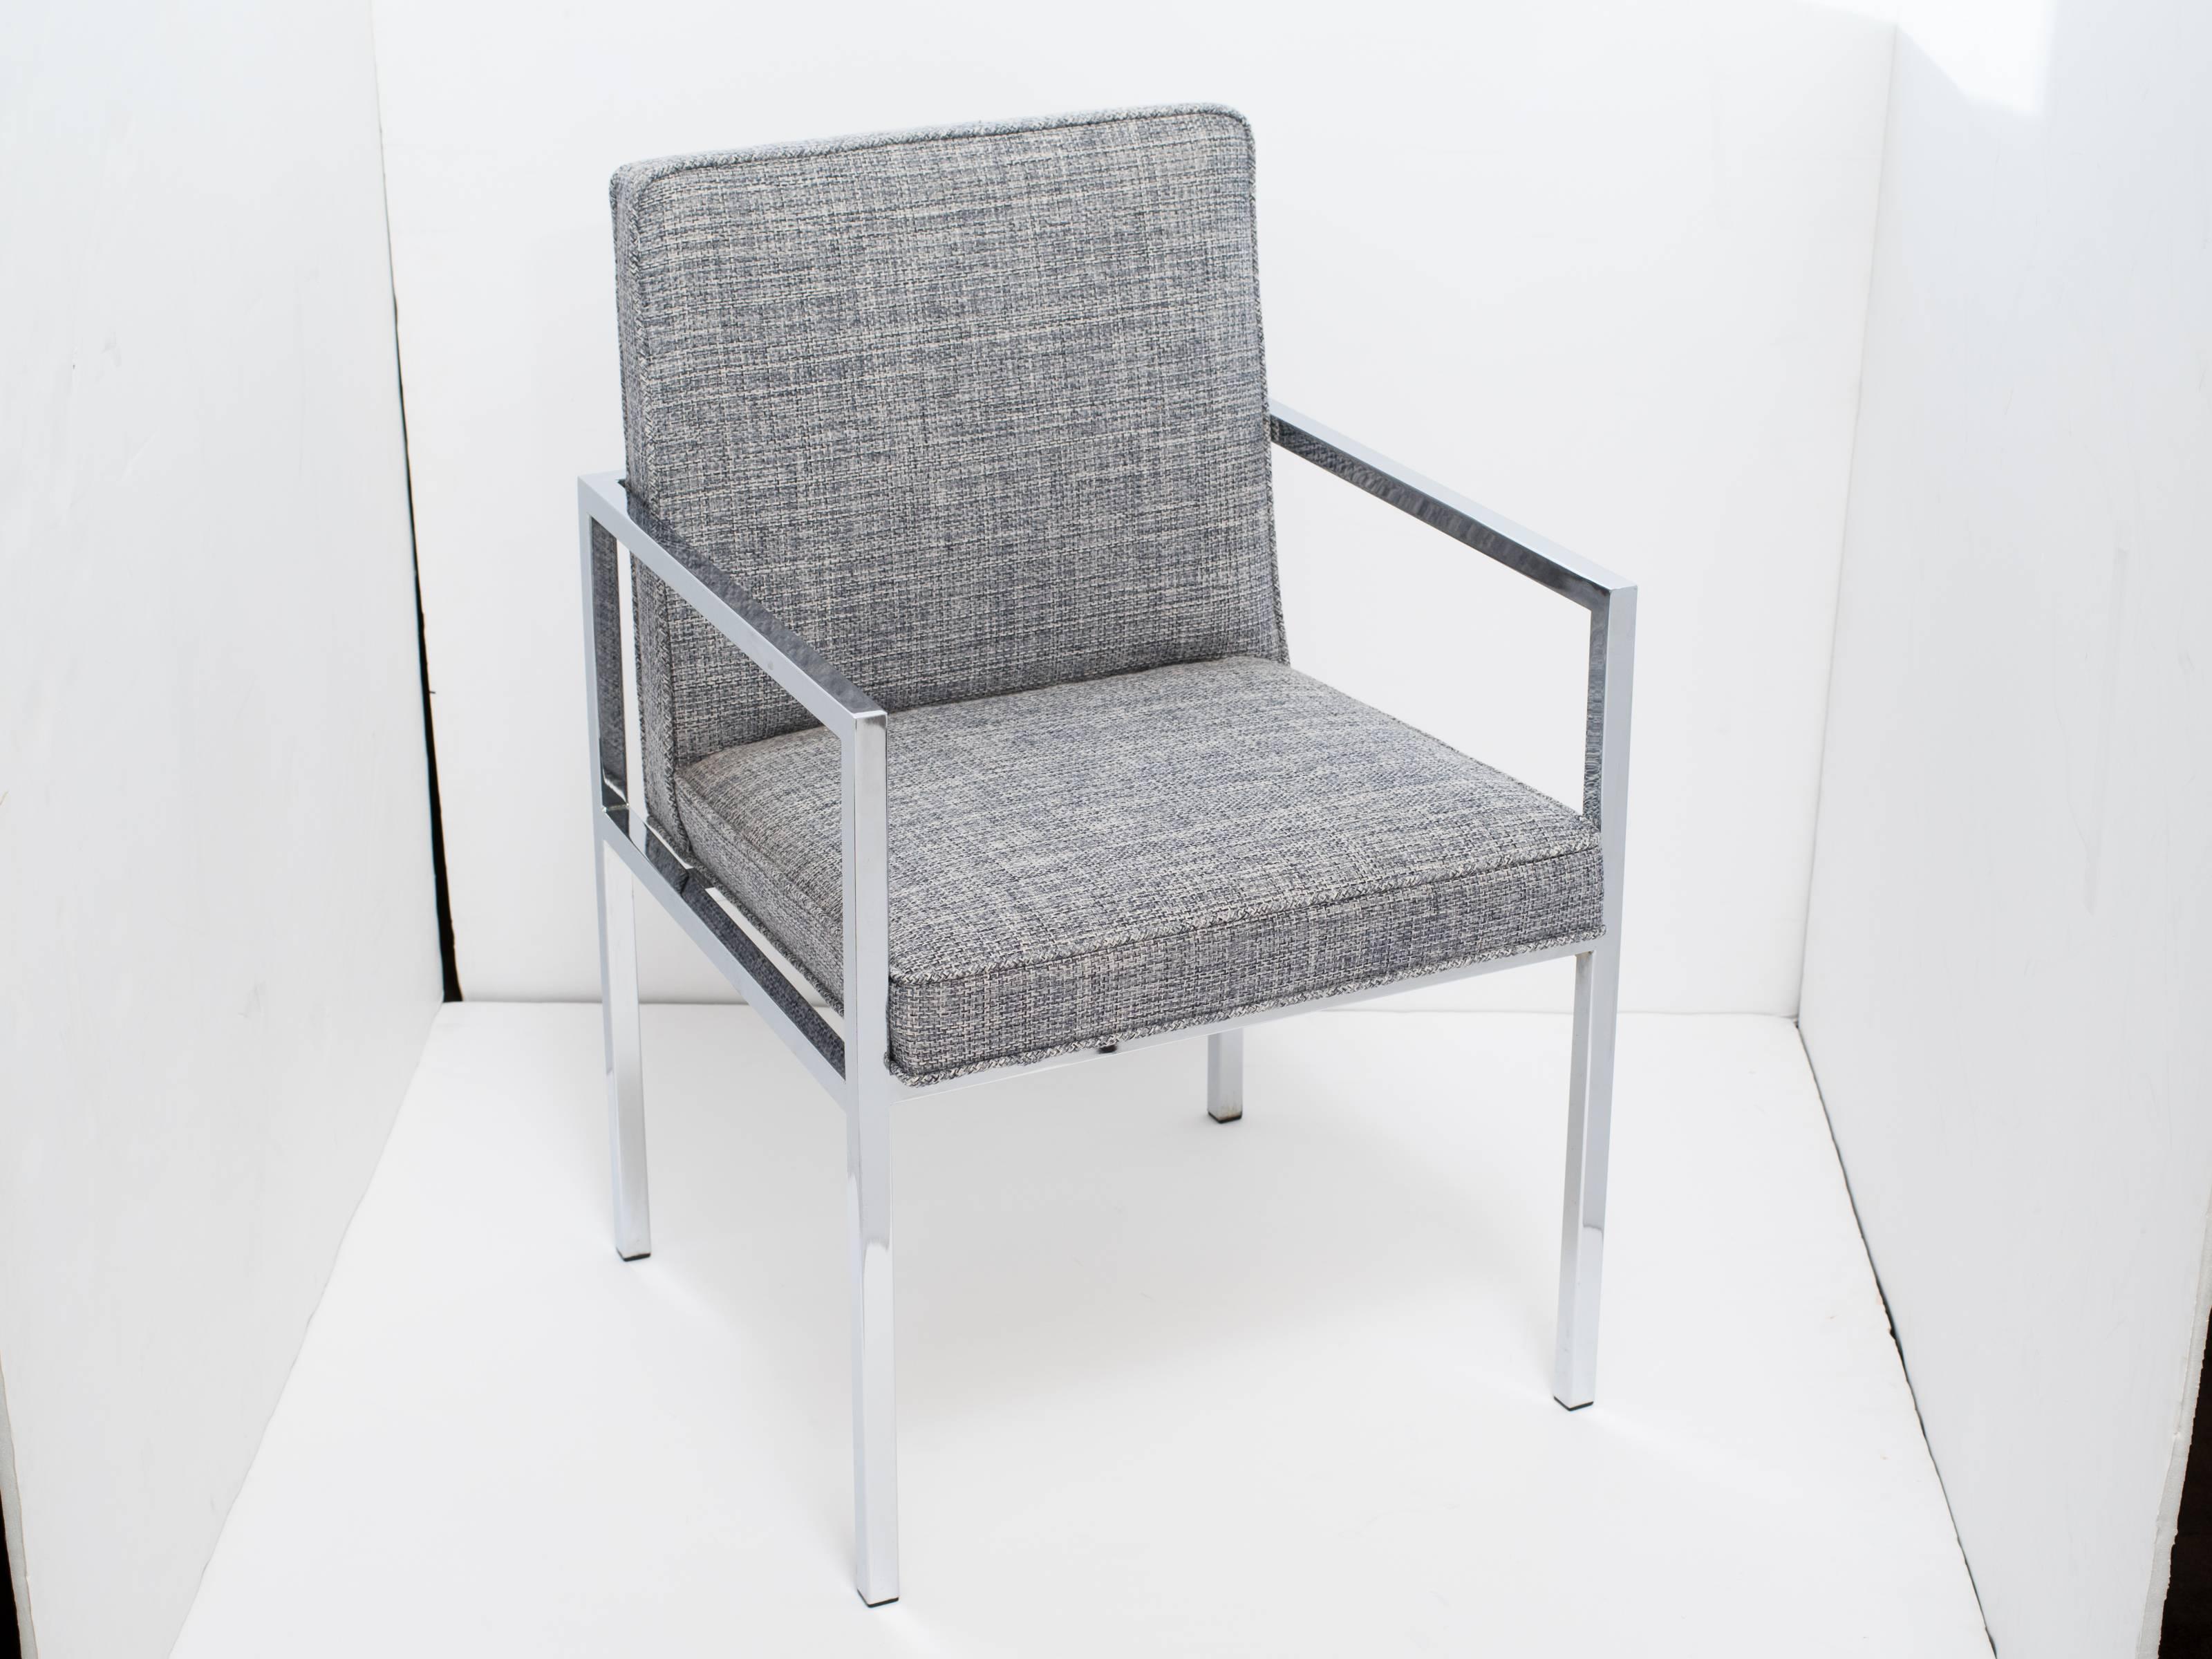 Mid-Century Modern Chrome Desk Chair with Woven Upholstery, c. 1970's For Sale 3